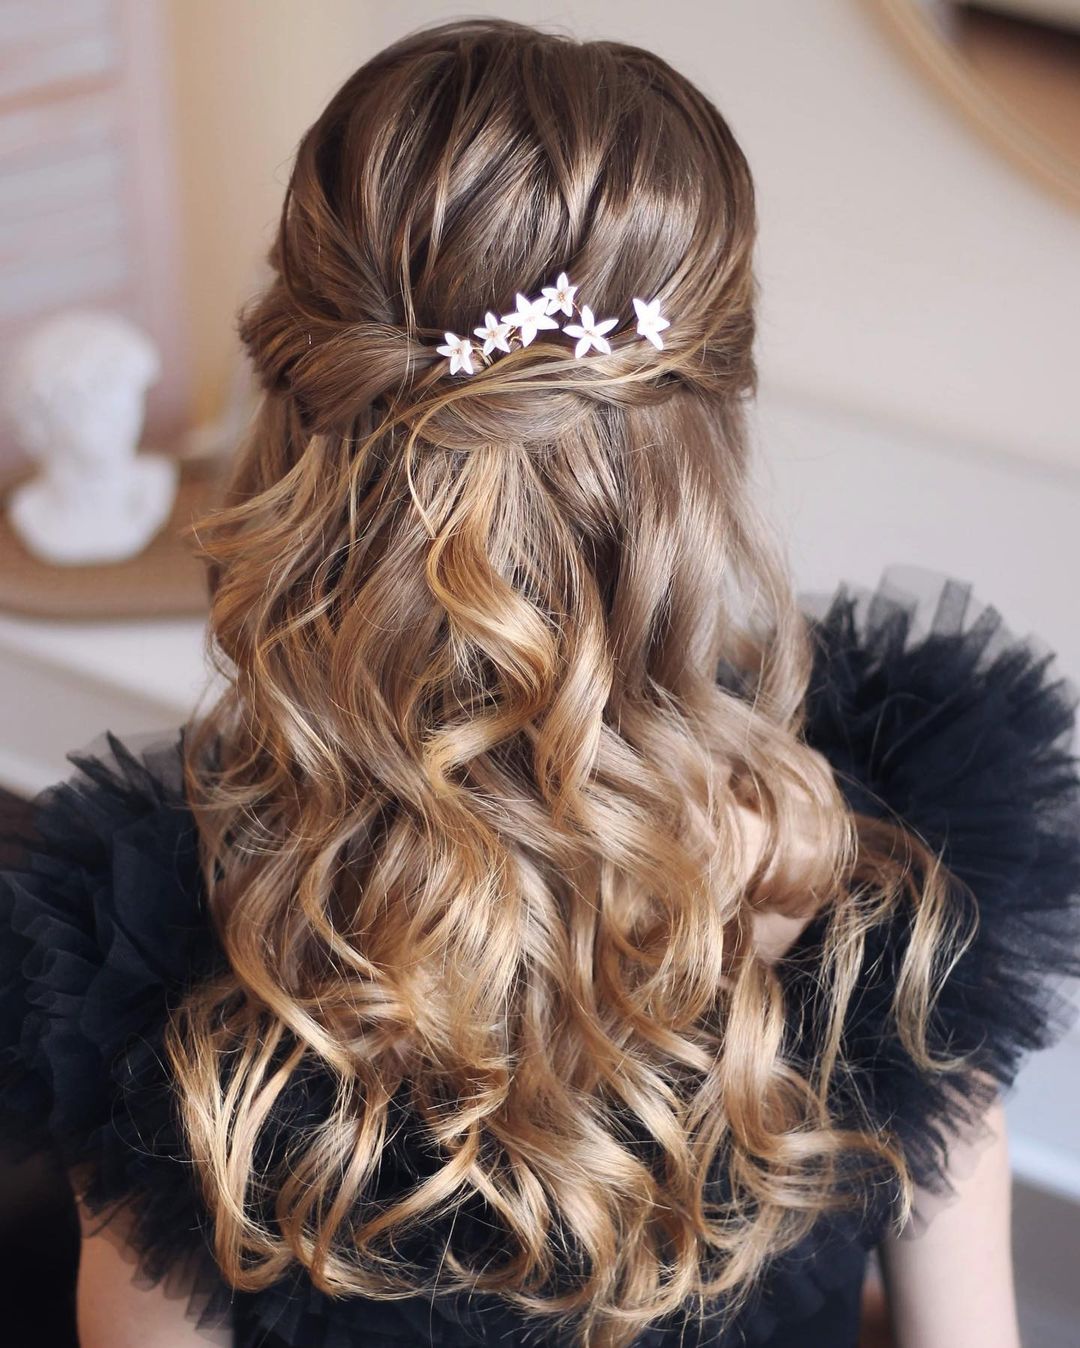 30 Best Prom Hairstyle Ideas to Elevate Your Look – The Right Hairstyles